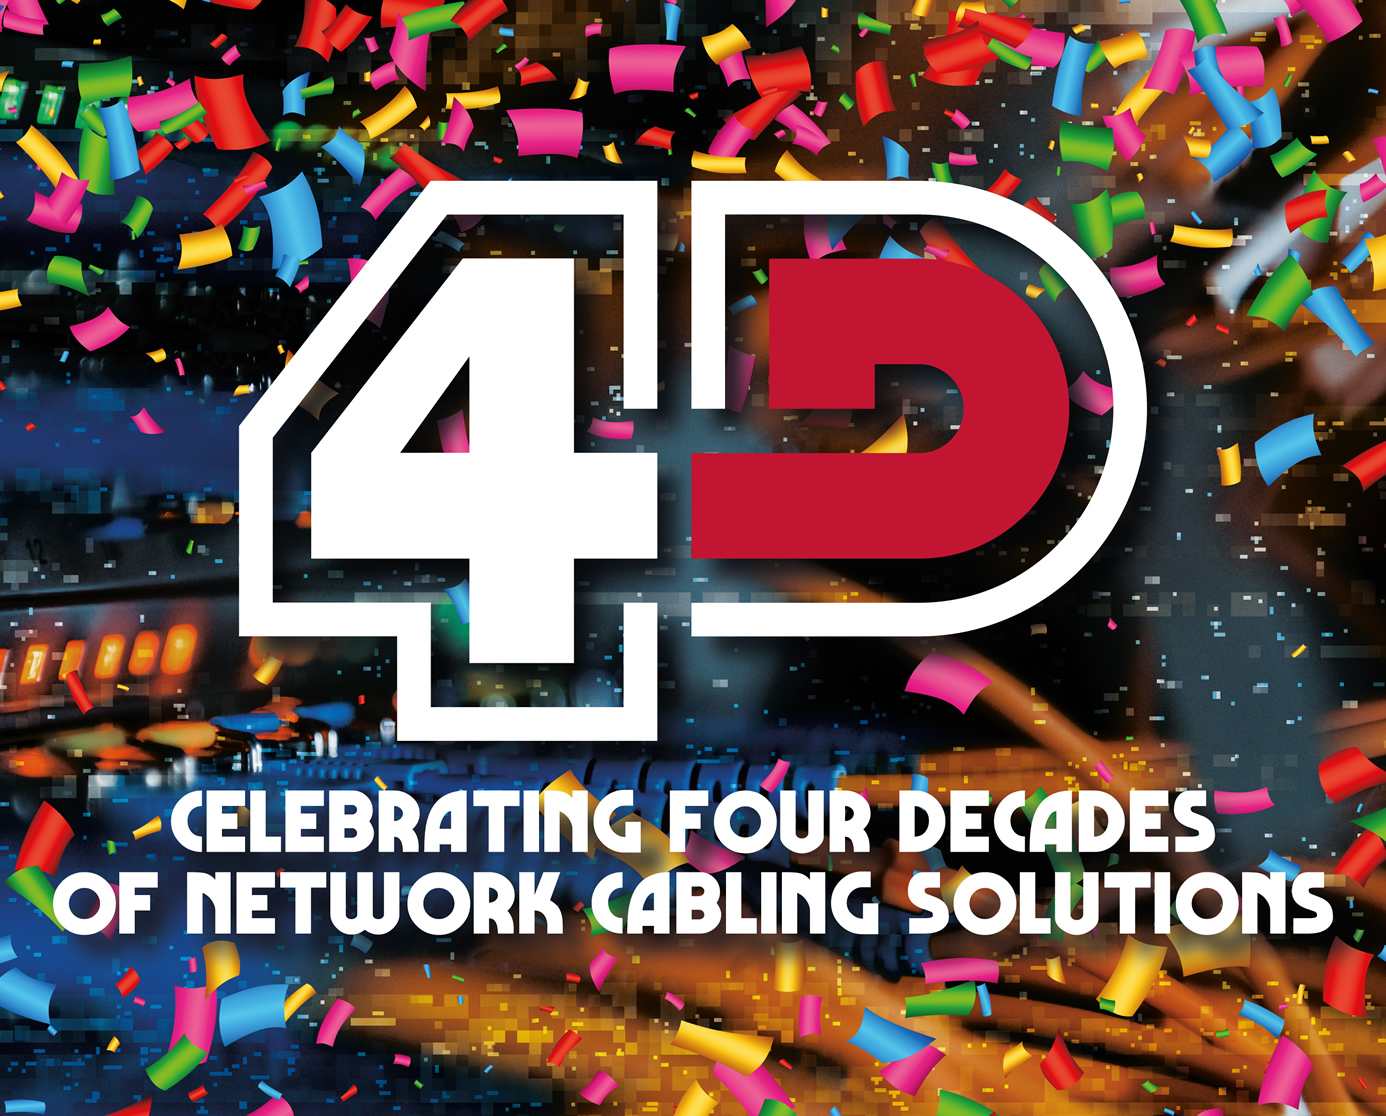 Celebrating 4 decades of network cabling solutions